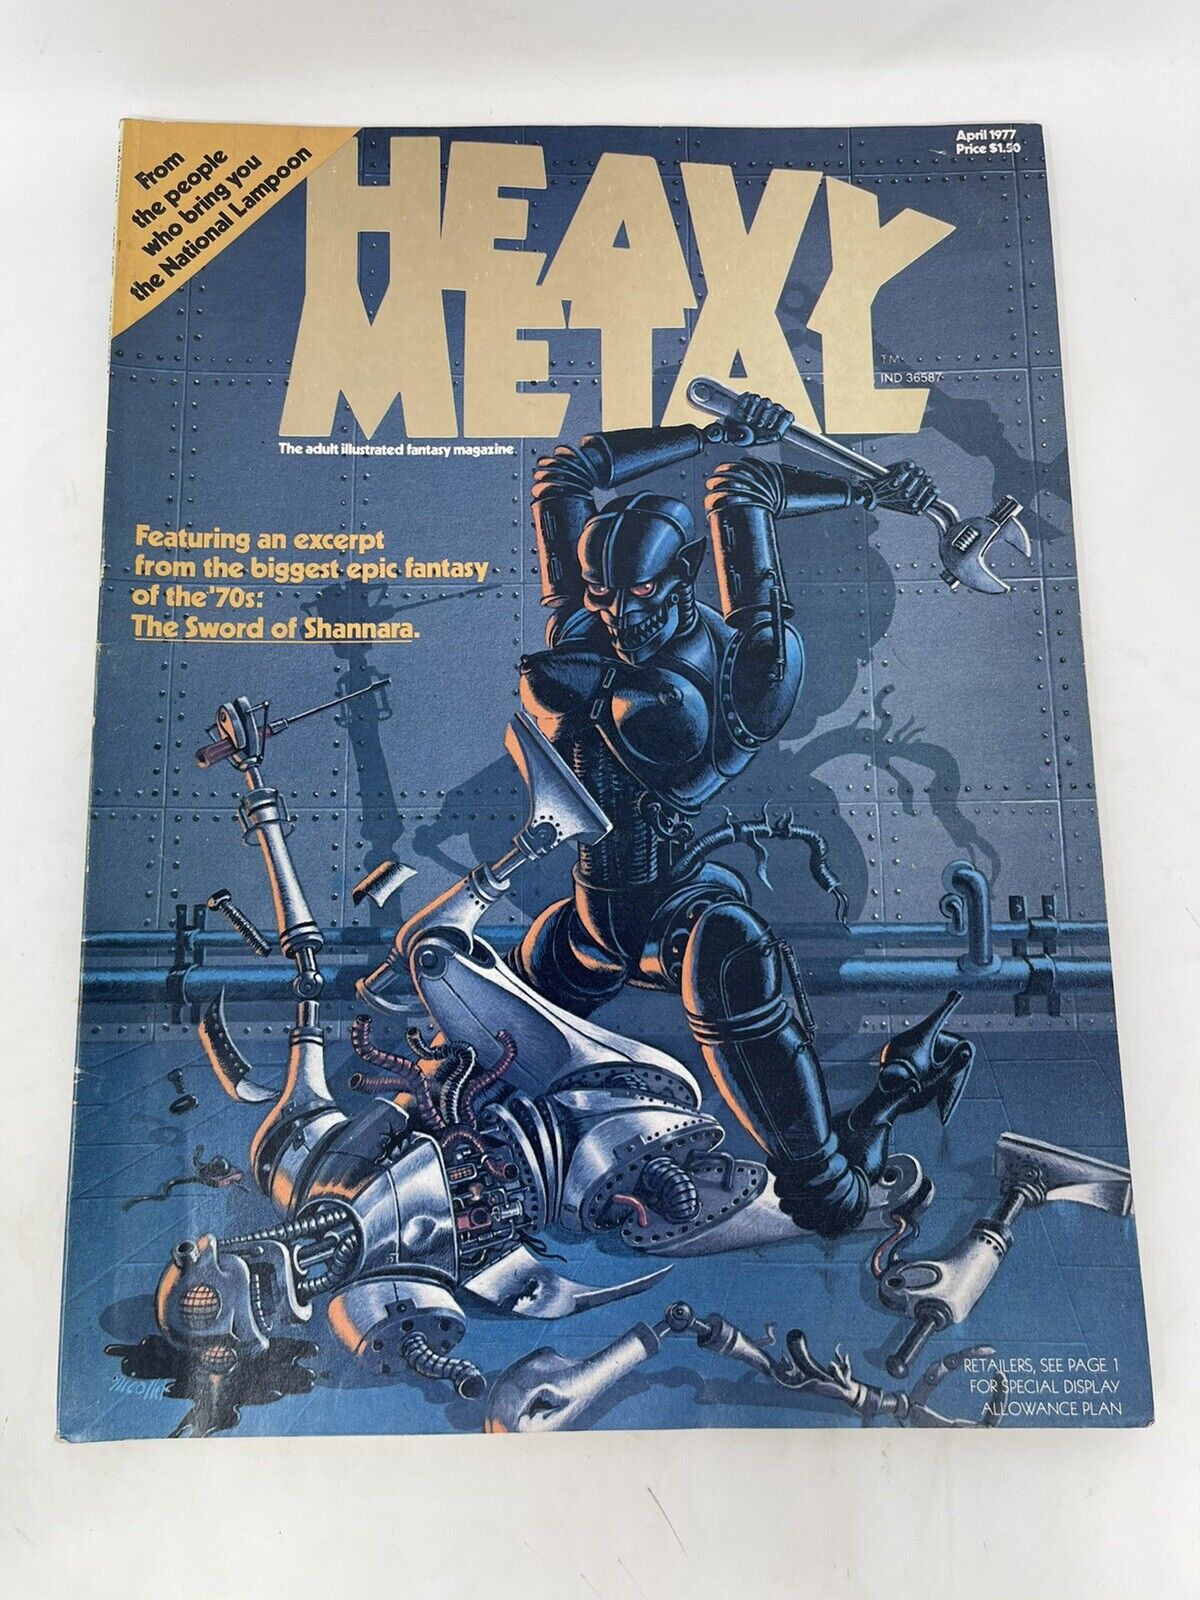 1977 Heavy Metal Magazine First Issue Vol. 1 No. 1 With Subscription Card